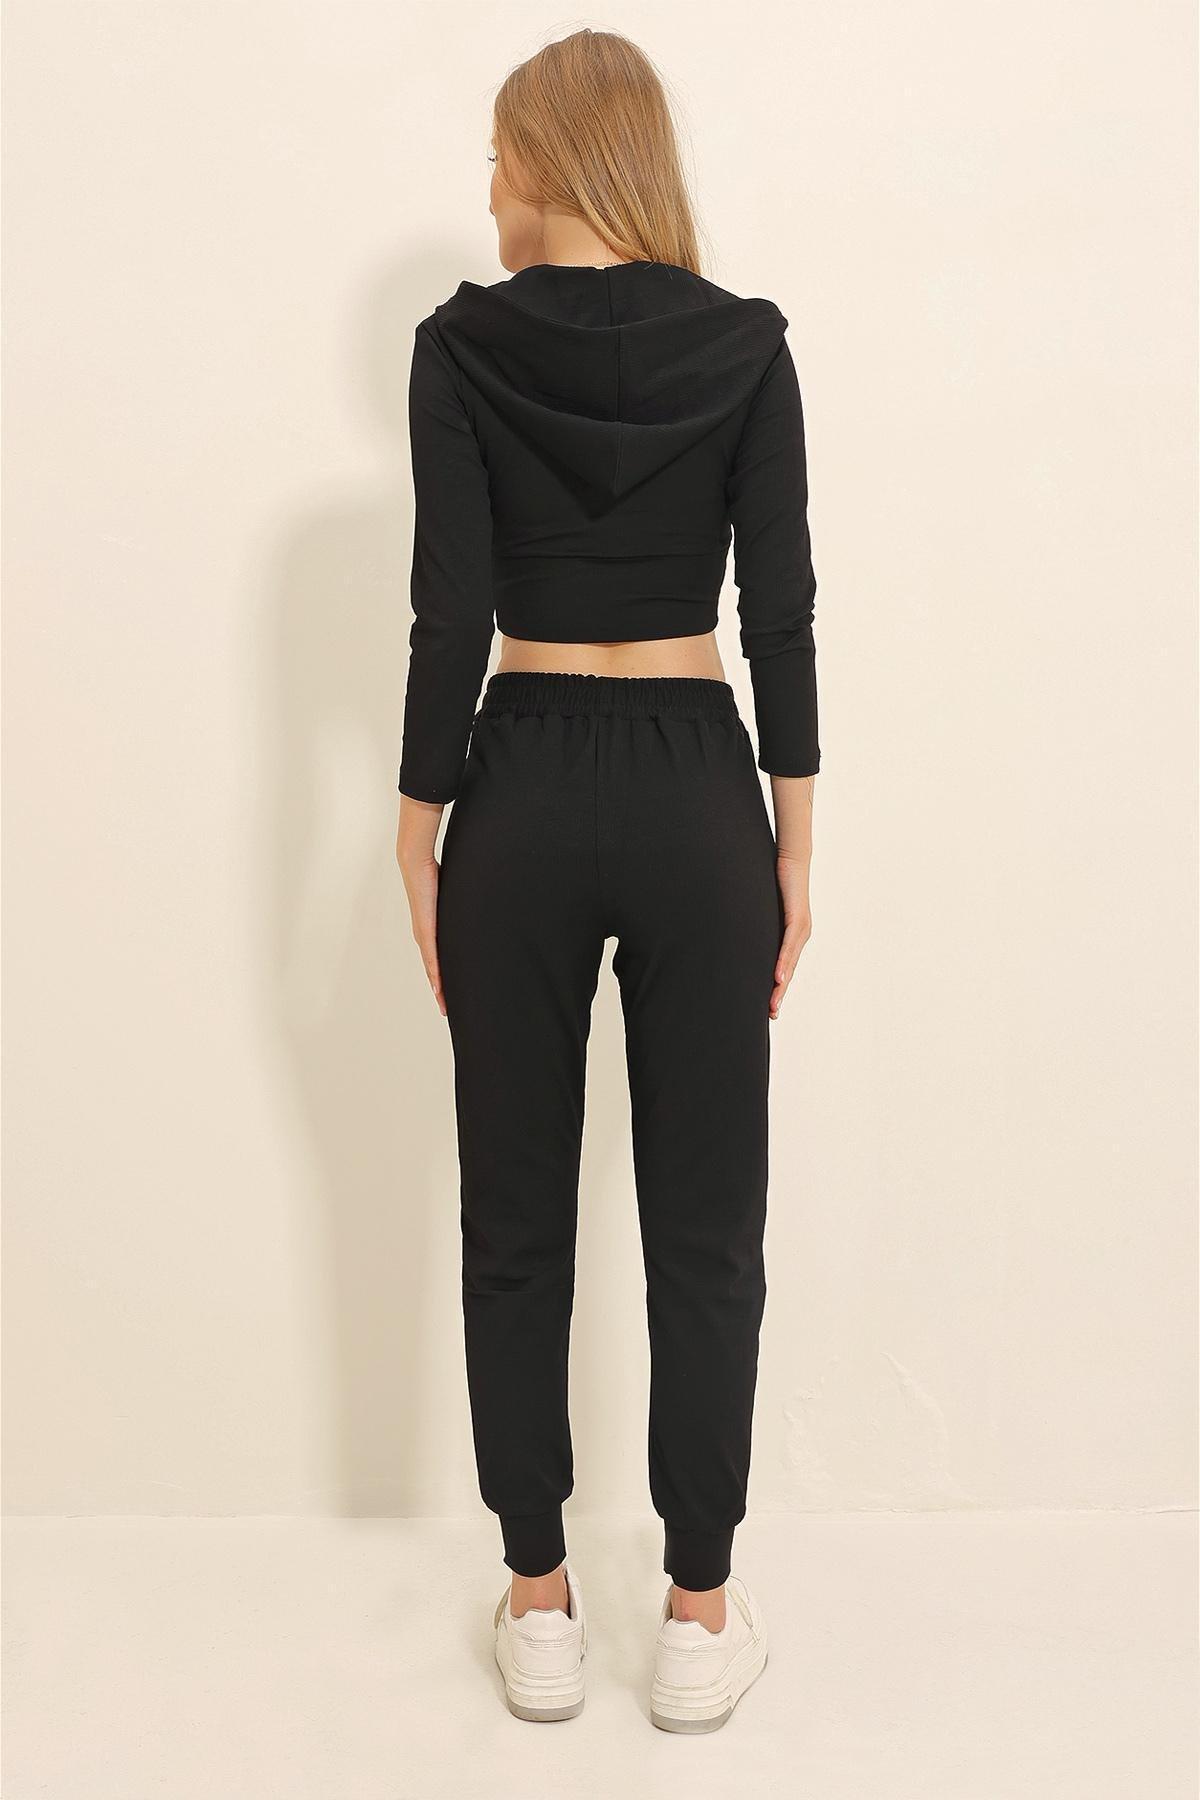 Alacati - Womens Black Hooded Zippered Crop Top and Double Pocket Corduroy Tracksuit ALC-X11428, 2 x